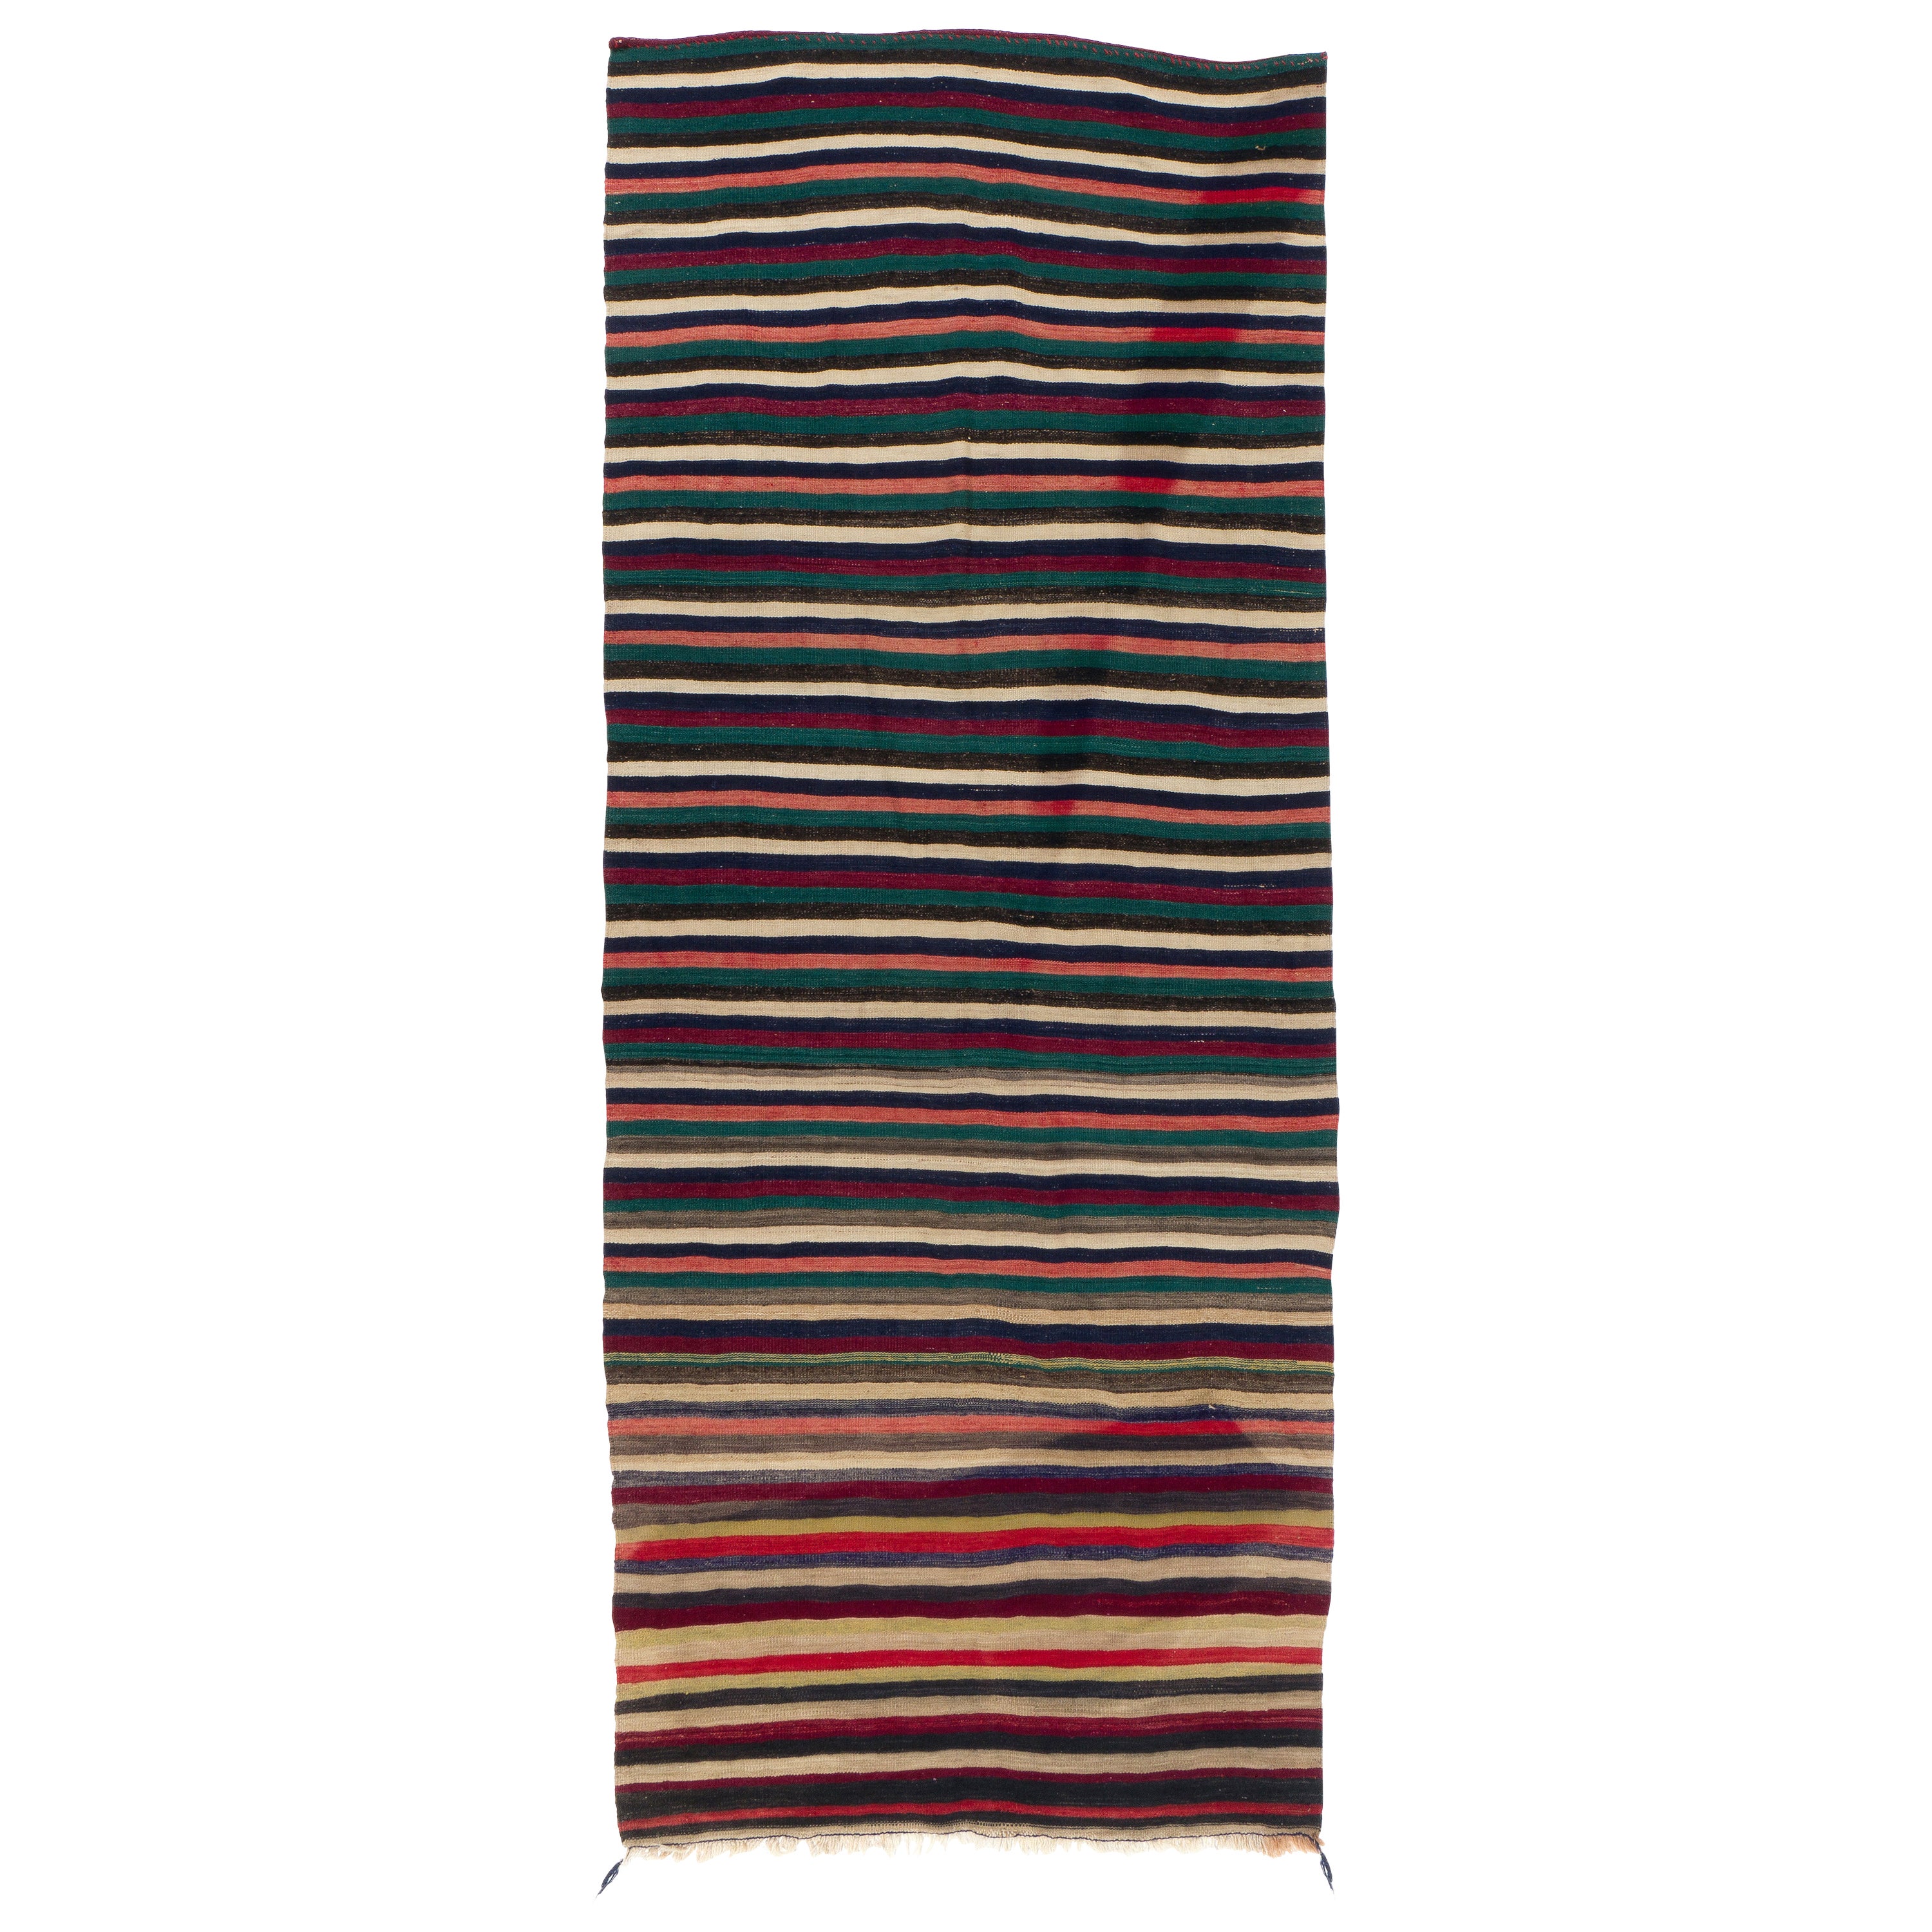 4.7x11.8 Ft Runner Kilim in Multicolor Stripe Pattern, Hand-Woven Turkish Rug For Sale